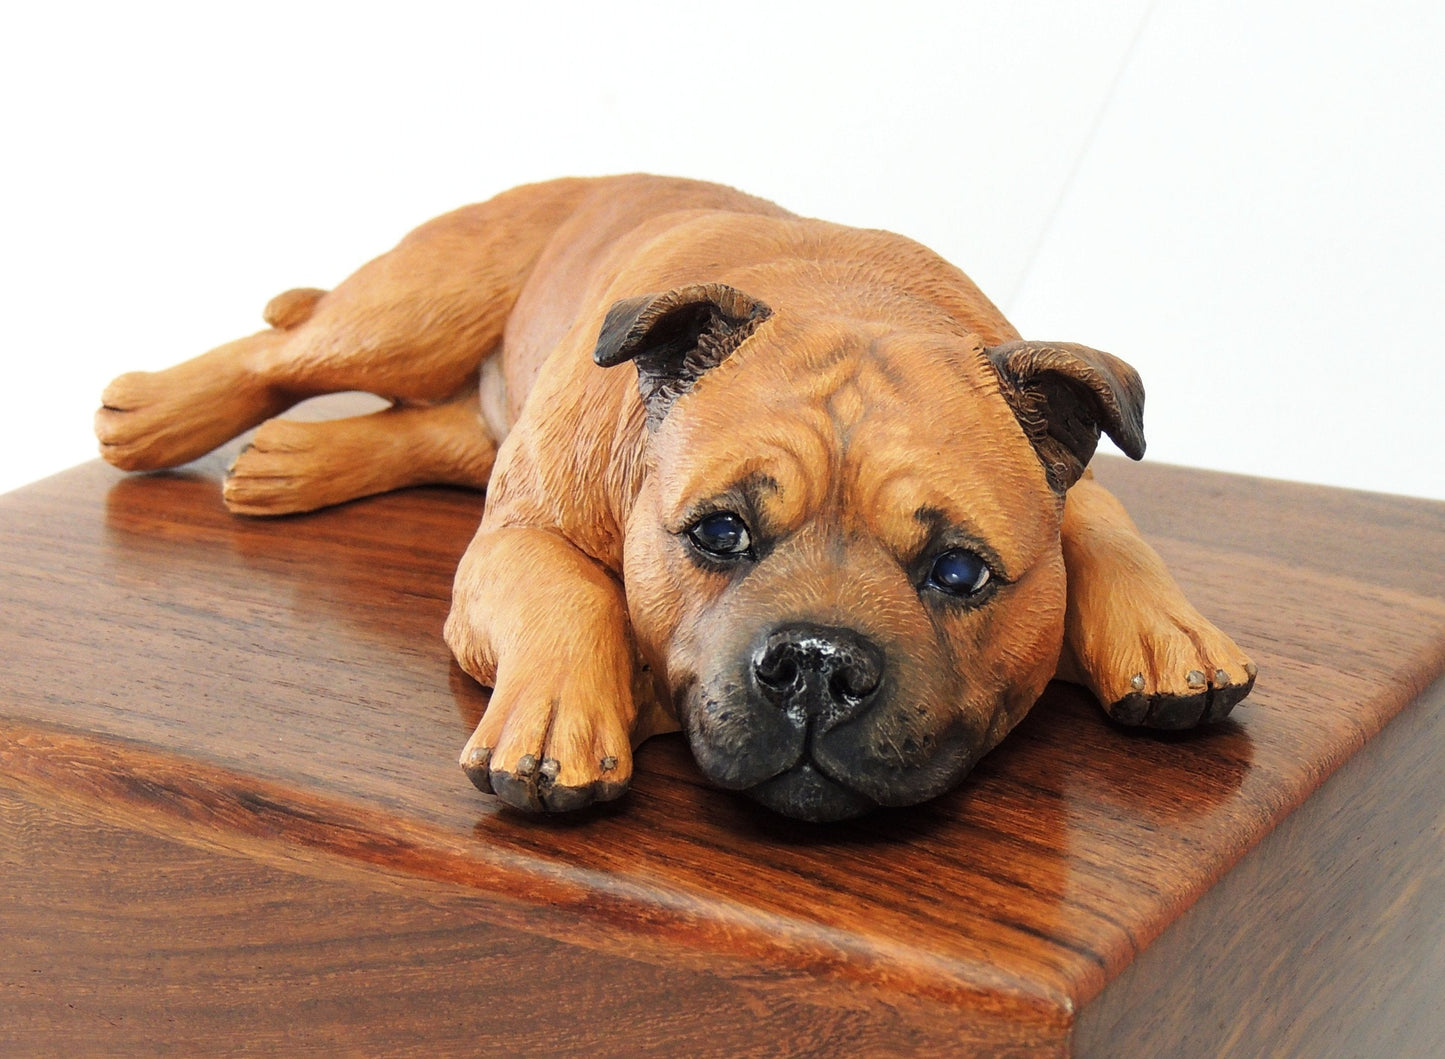 Sculpture of a red staffordshire bull terrier